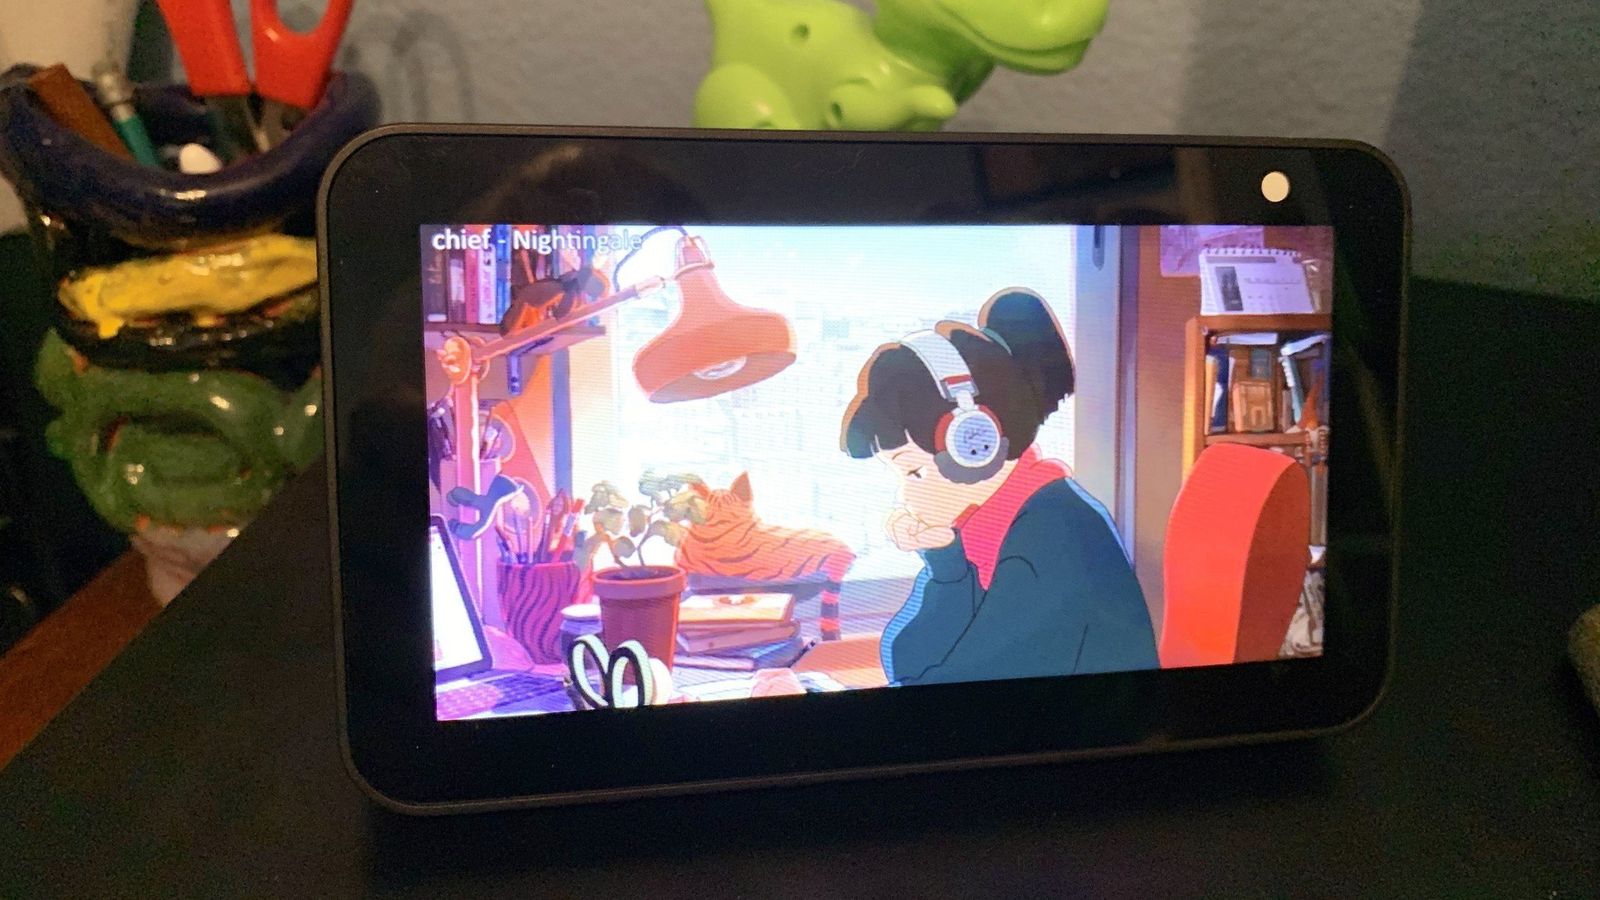 Youtube streaming on Echo Show 5